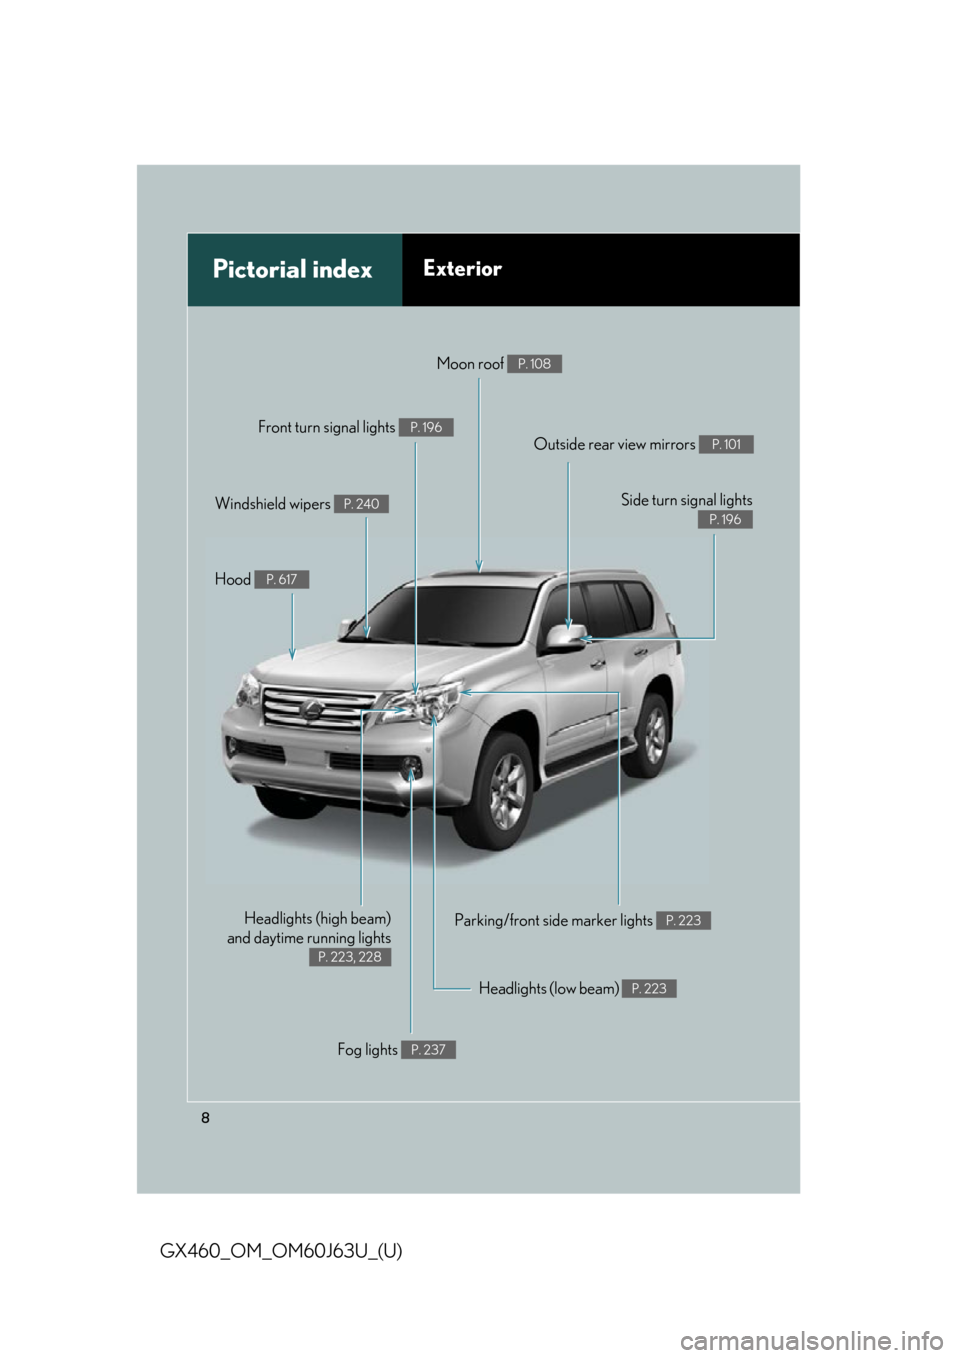 Lexus GX460 2013  Specifications / 8
GX460_OM_OM60J63U_(U)
Pictorial indexExterior
Fog lights P. 237
Parking/front side marker lights P. 223
Headlights (low beam) P. 223
Hood P. 617
Windshield wipers P. 240
Moon roof P. 108
Outside rea